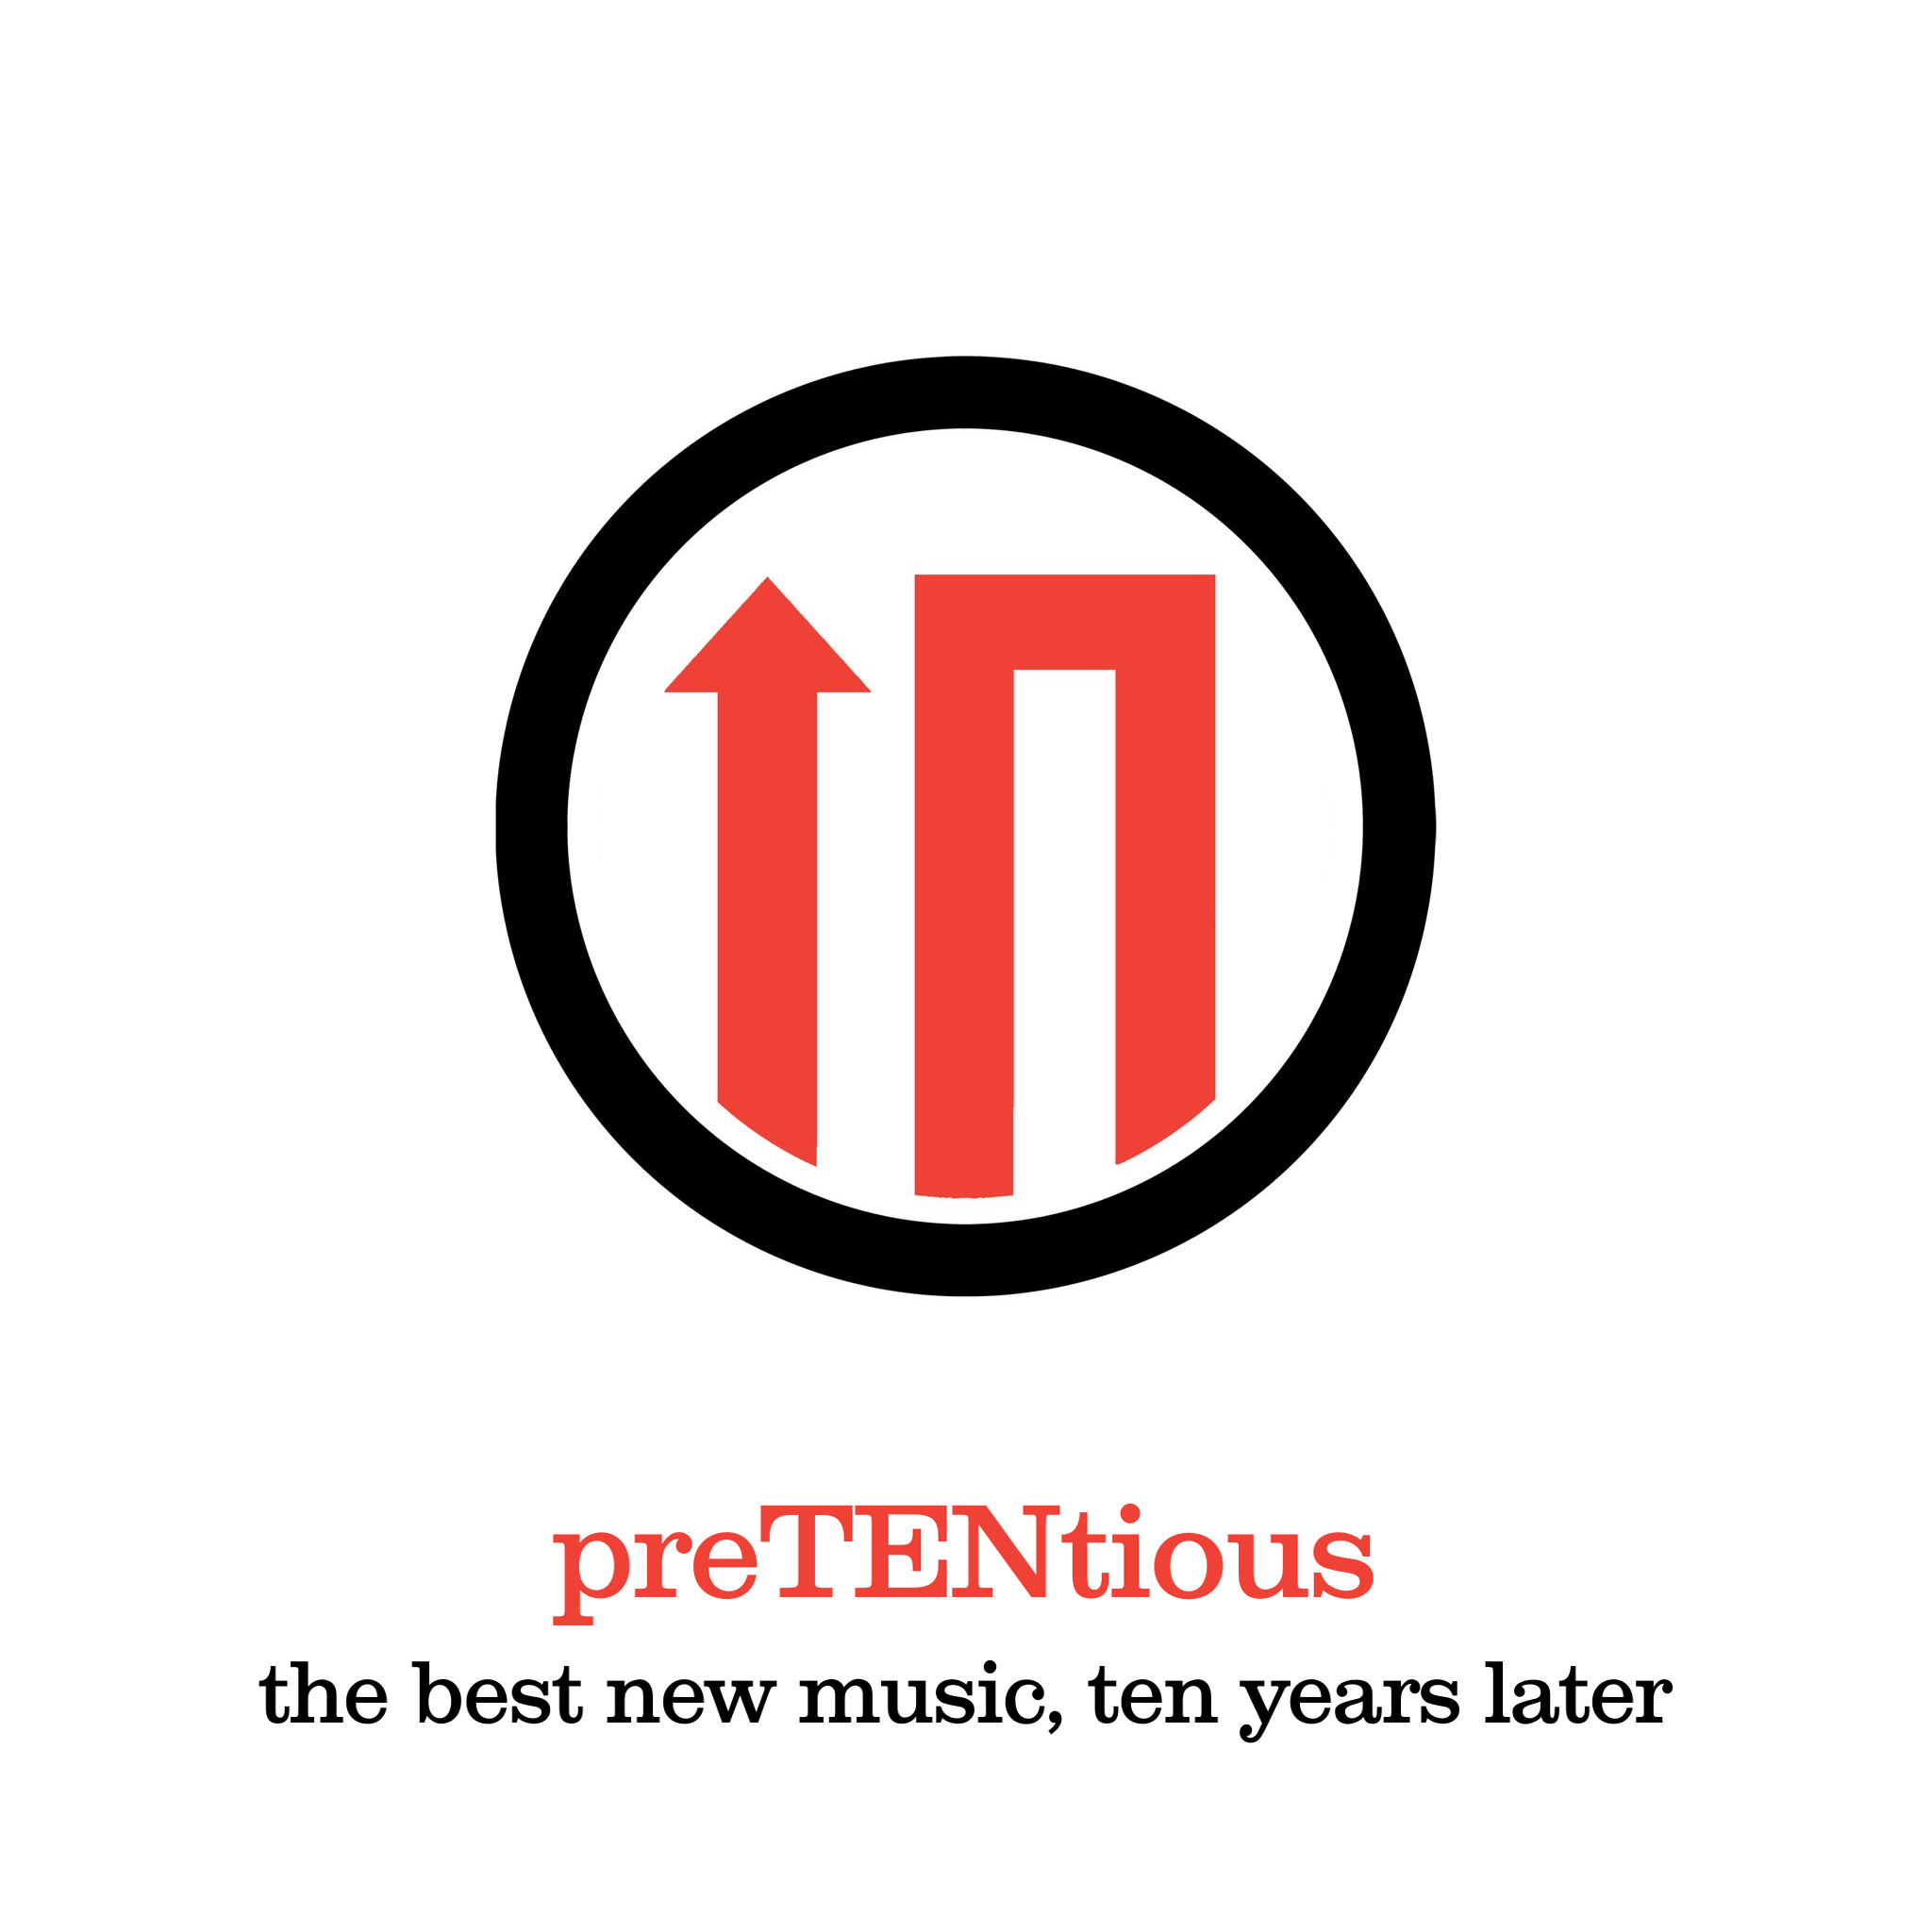 preTENtious: the best new music, ten years later